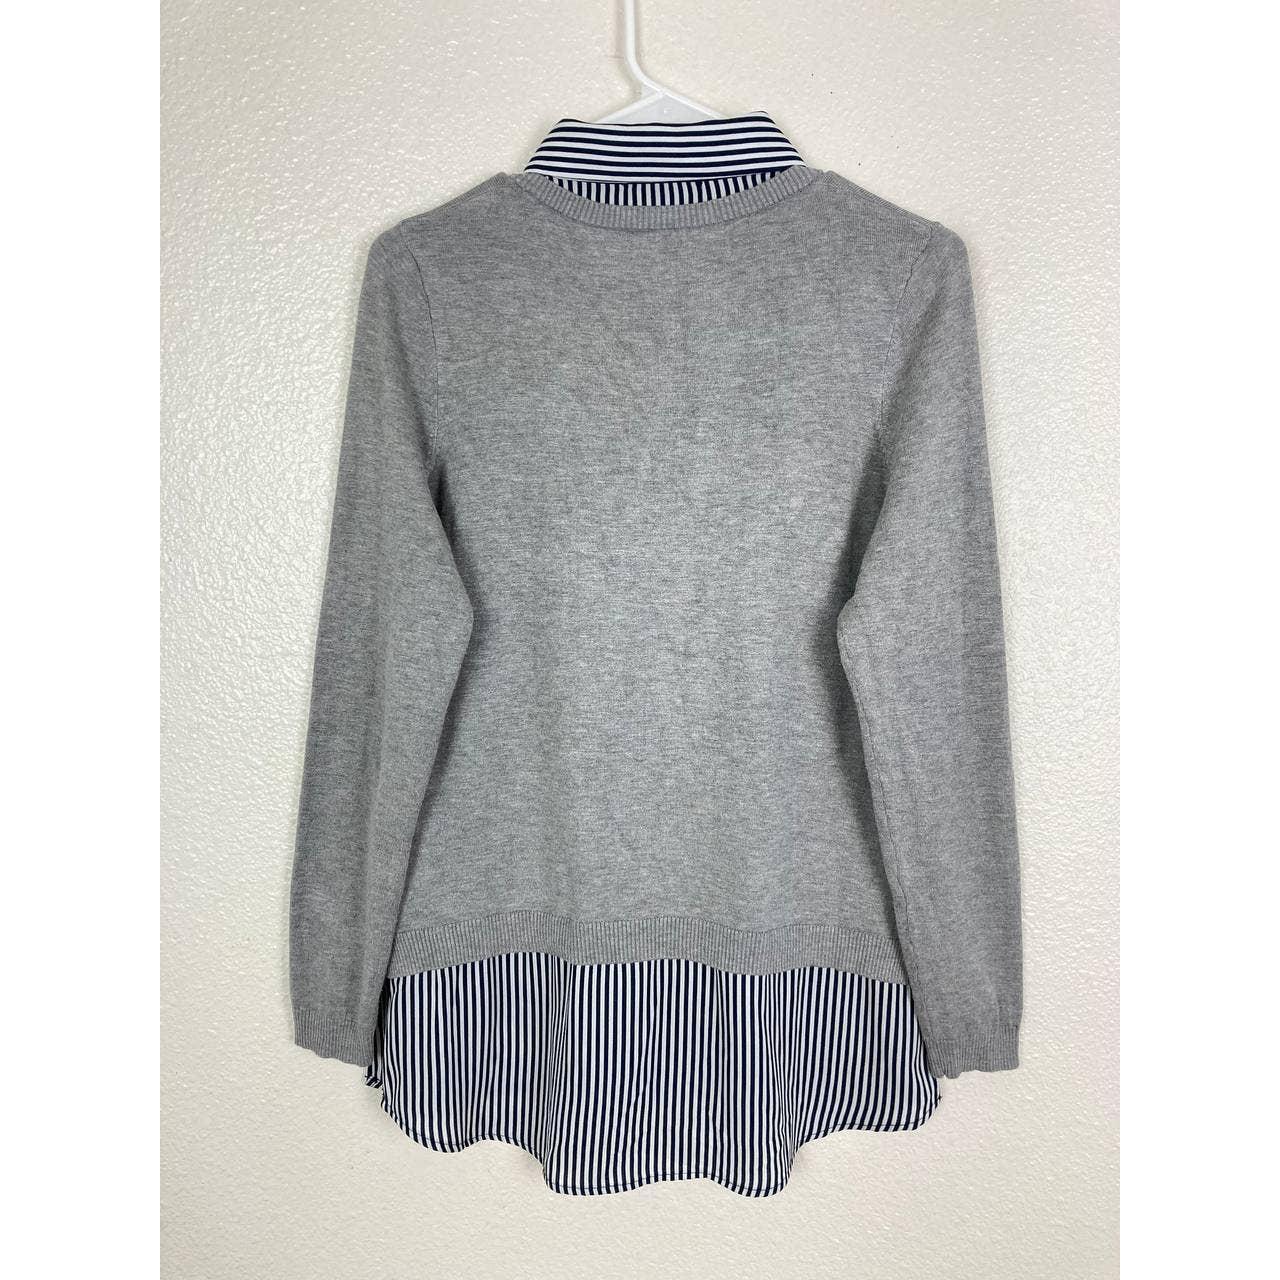 Adrianna Papell Women's Grey and White Jumper (4)